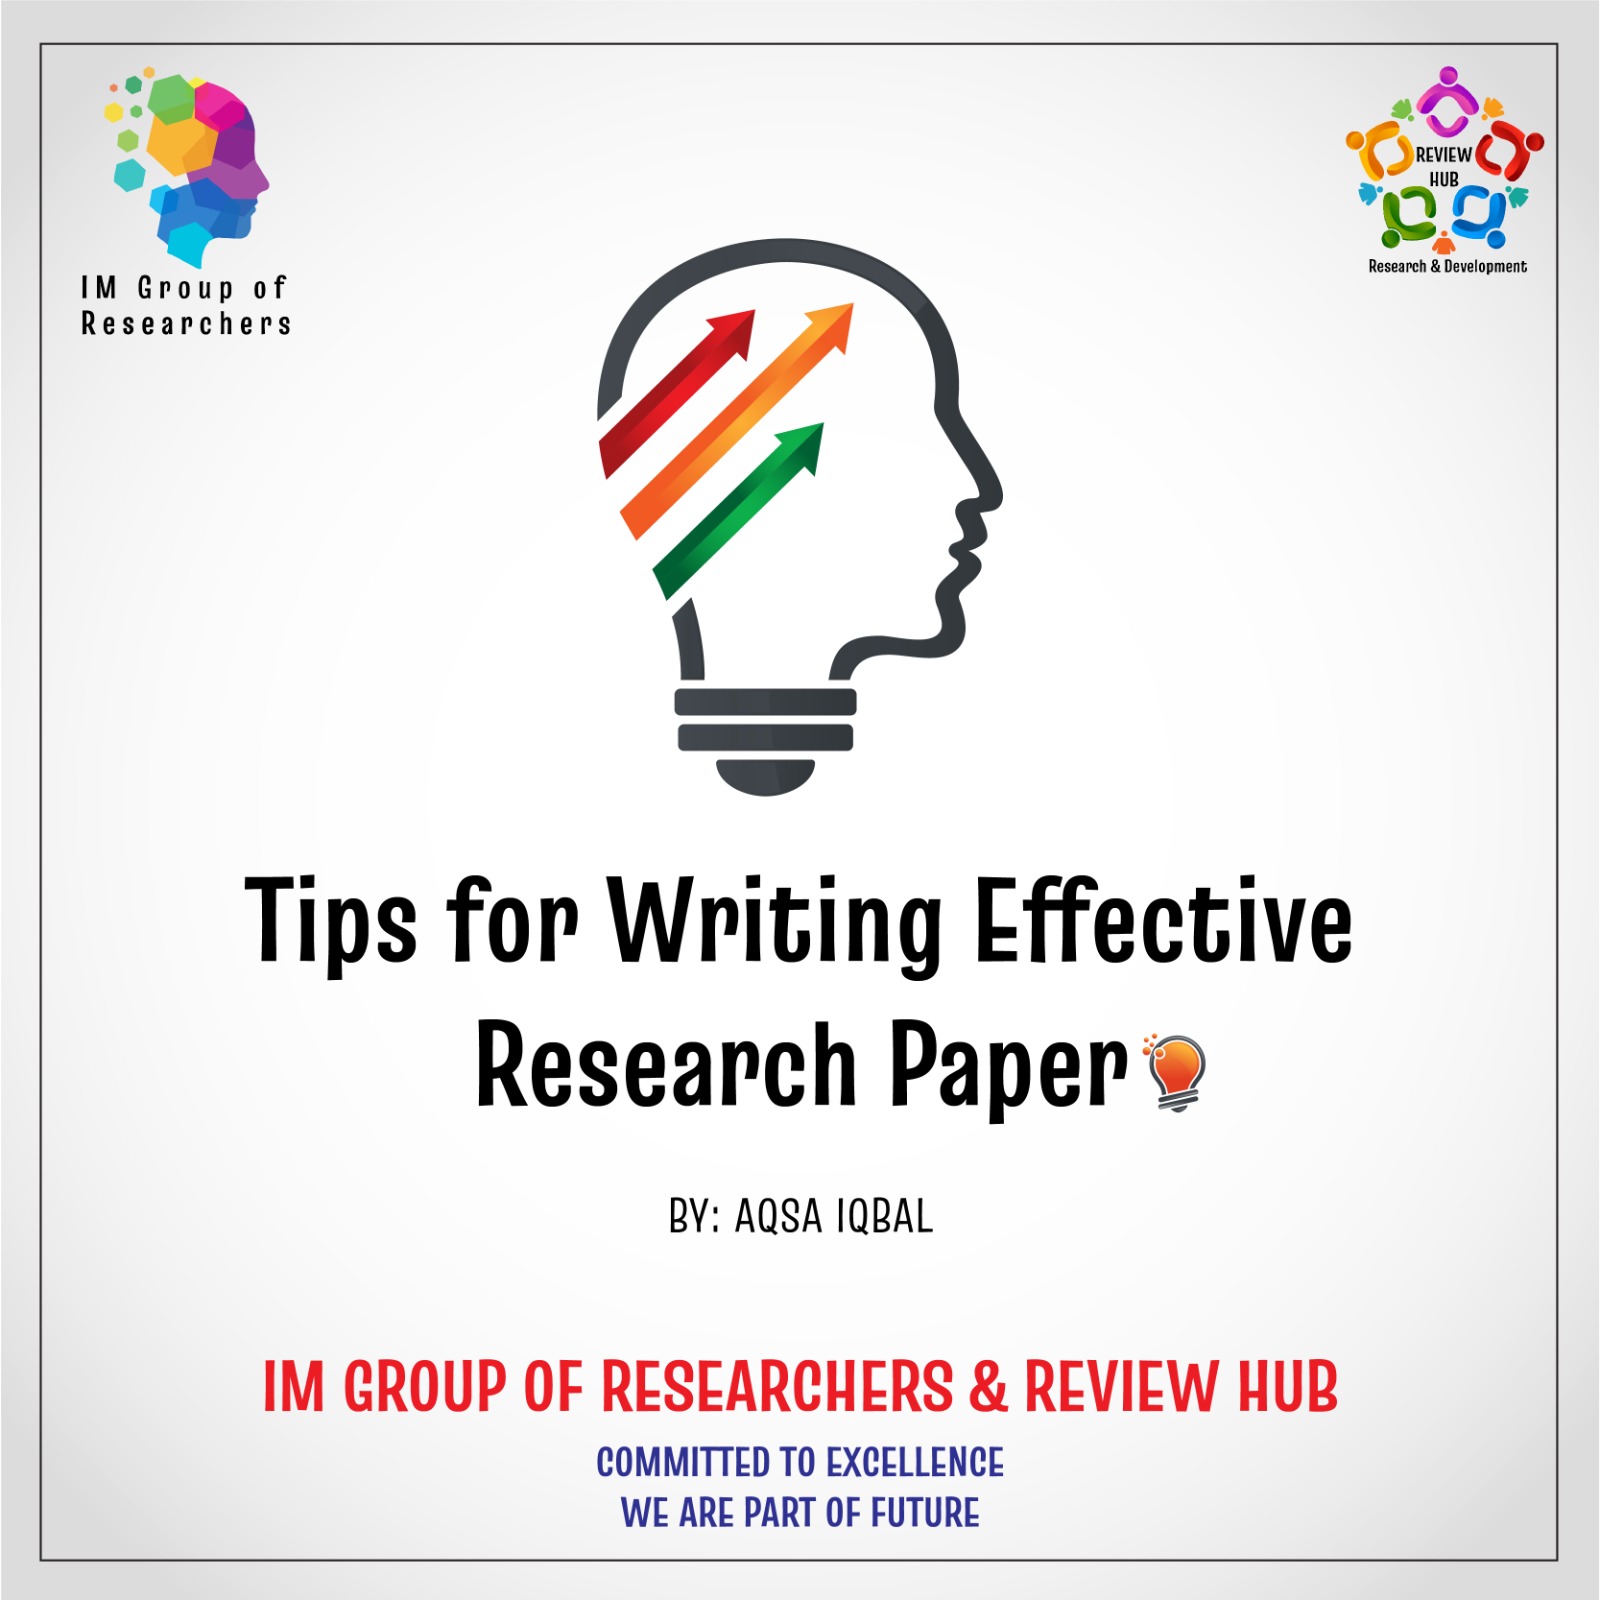 13 Tips for Writing Effective Research Paper